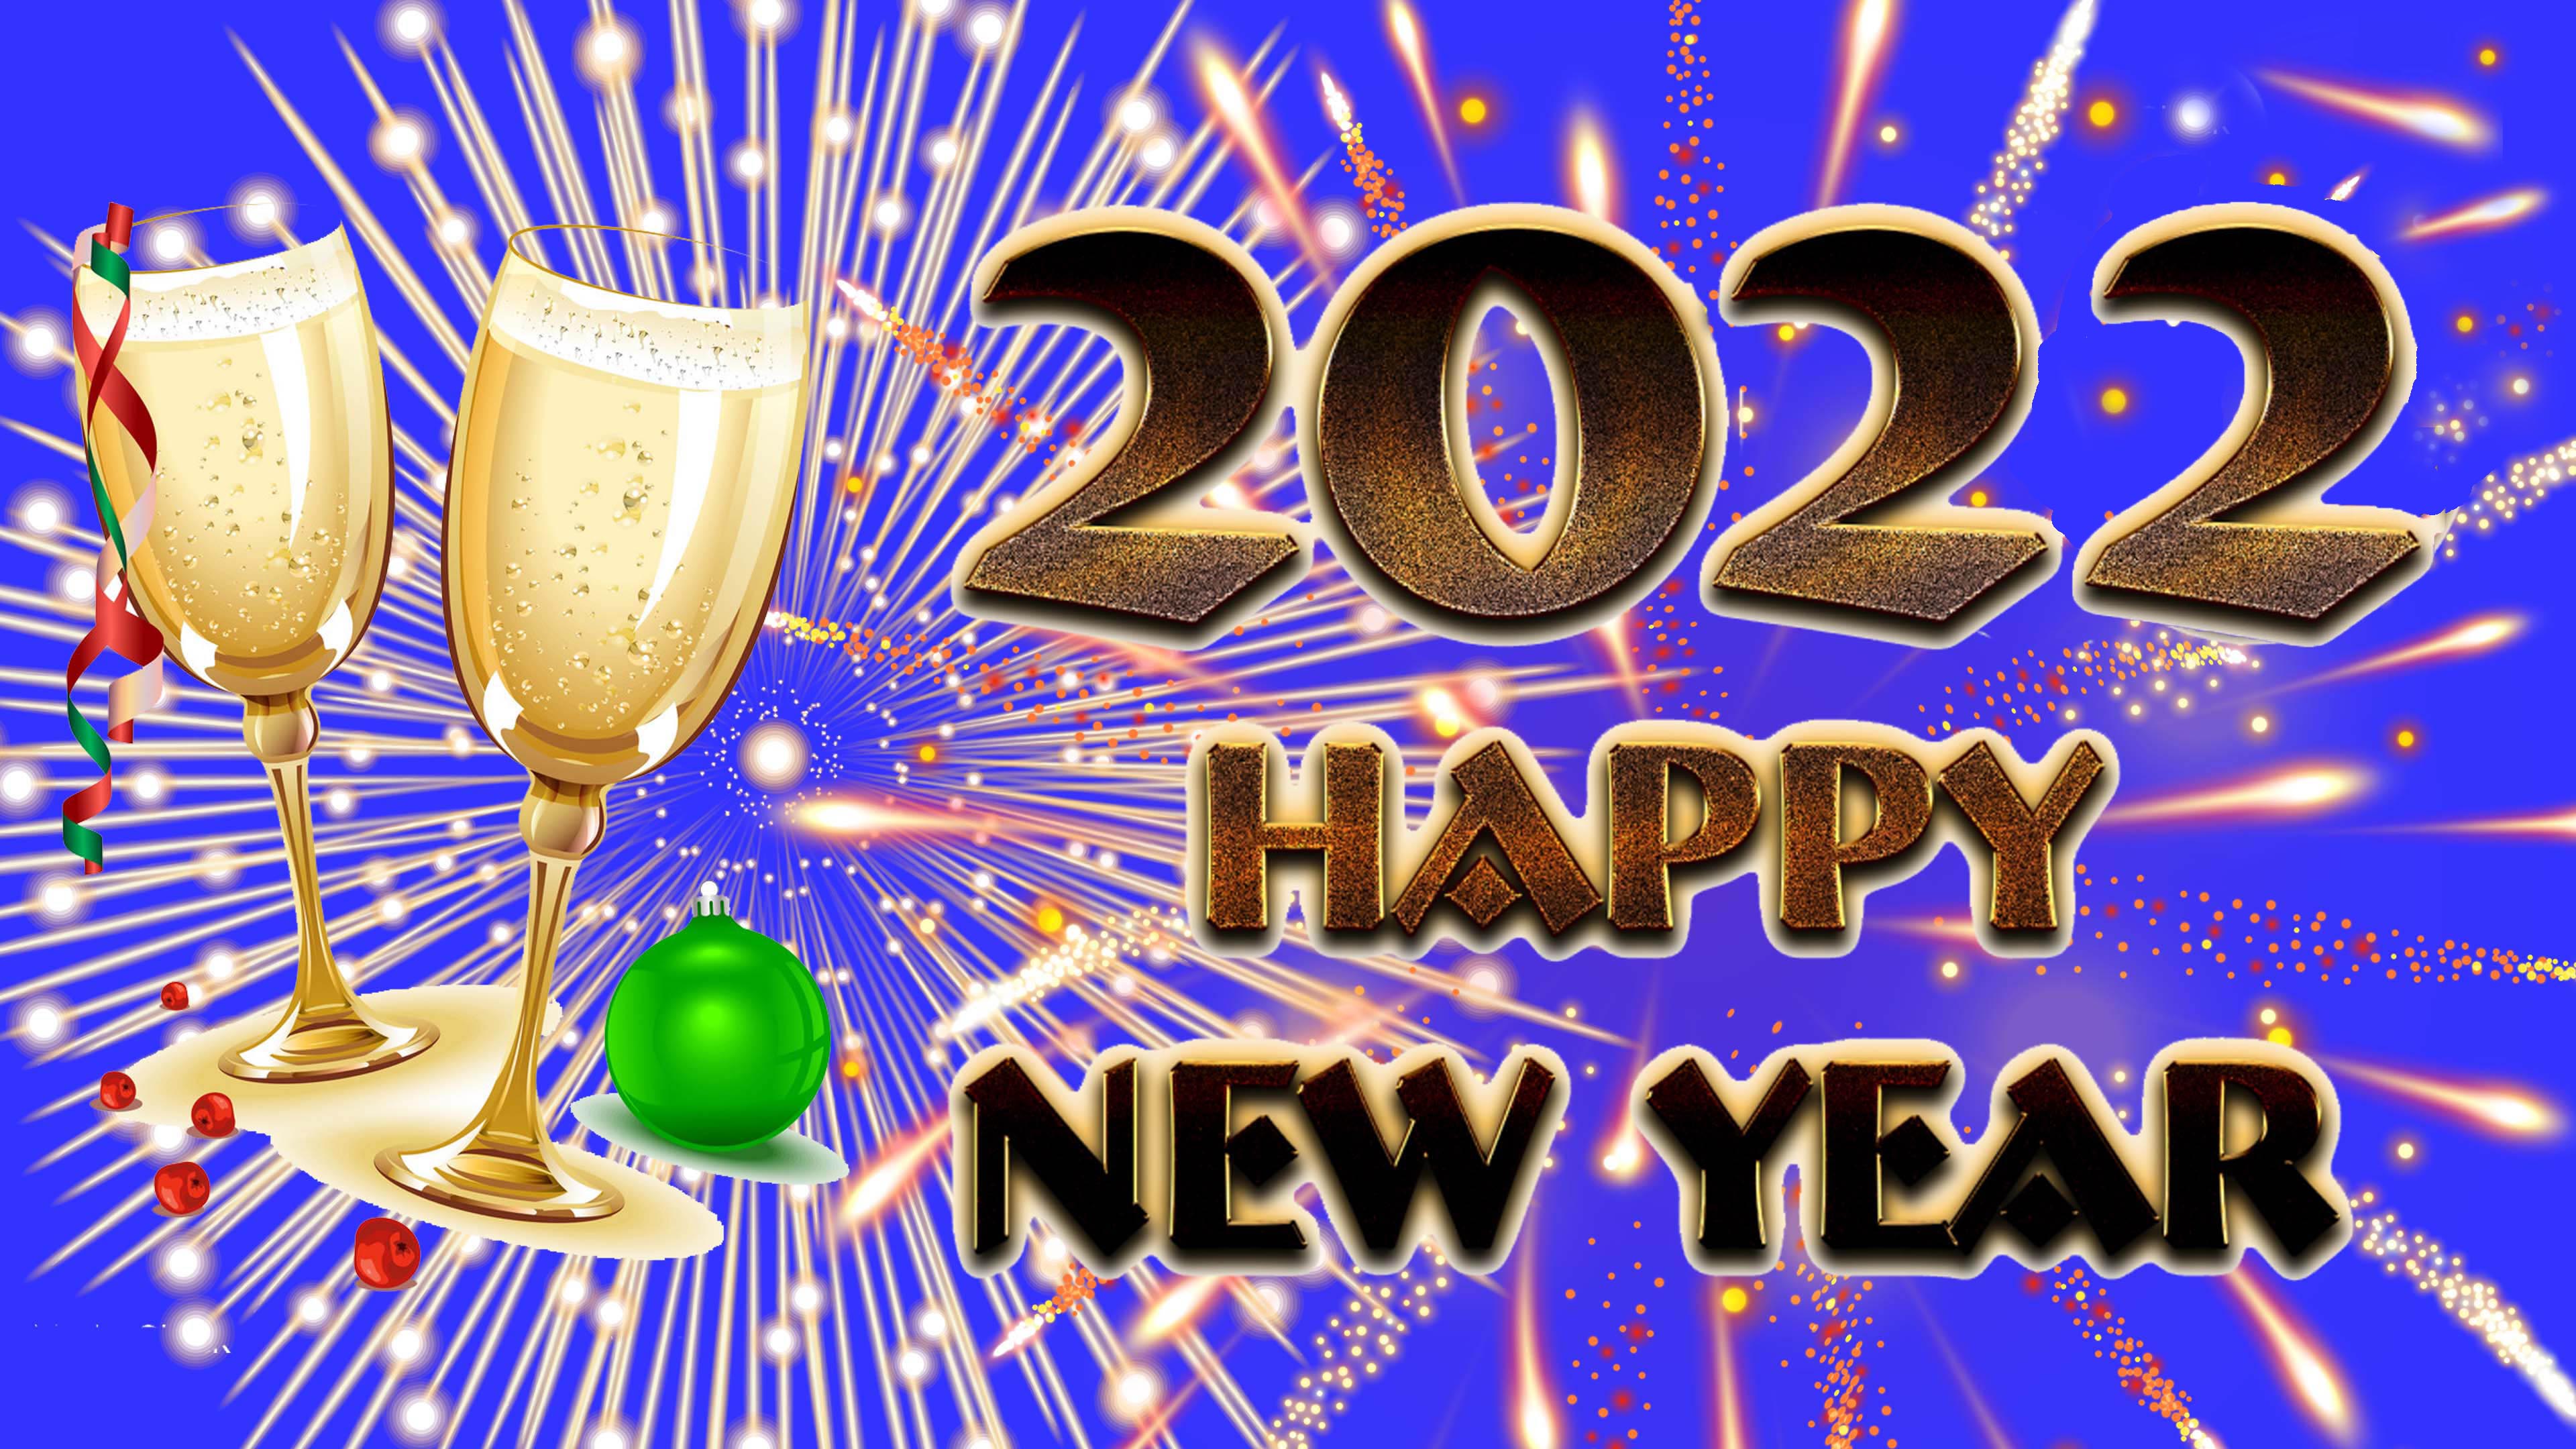 Greeting Card Happy New Year 2022 Champagne Fireworks Ultra Hd Wallpapers  For Desktop 3840x2160 : 